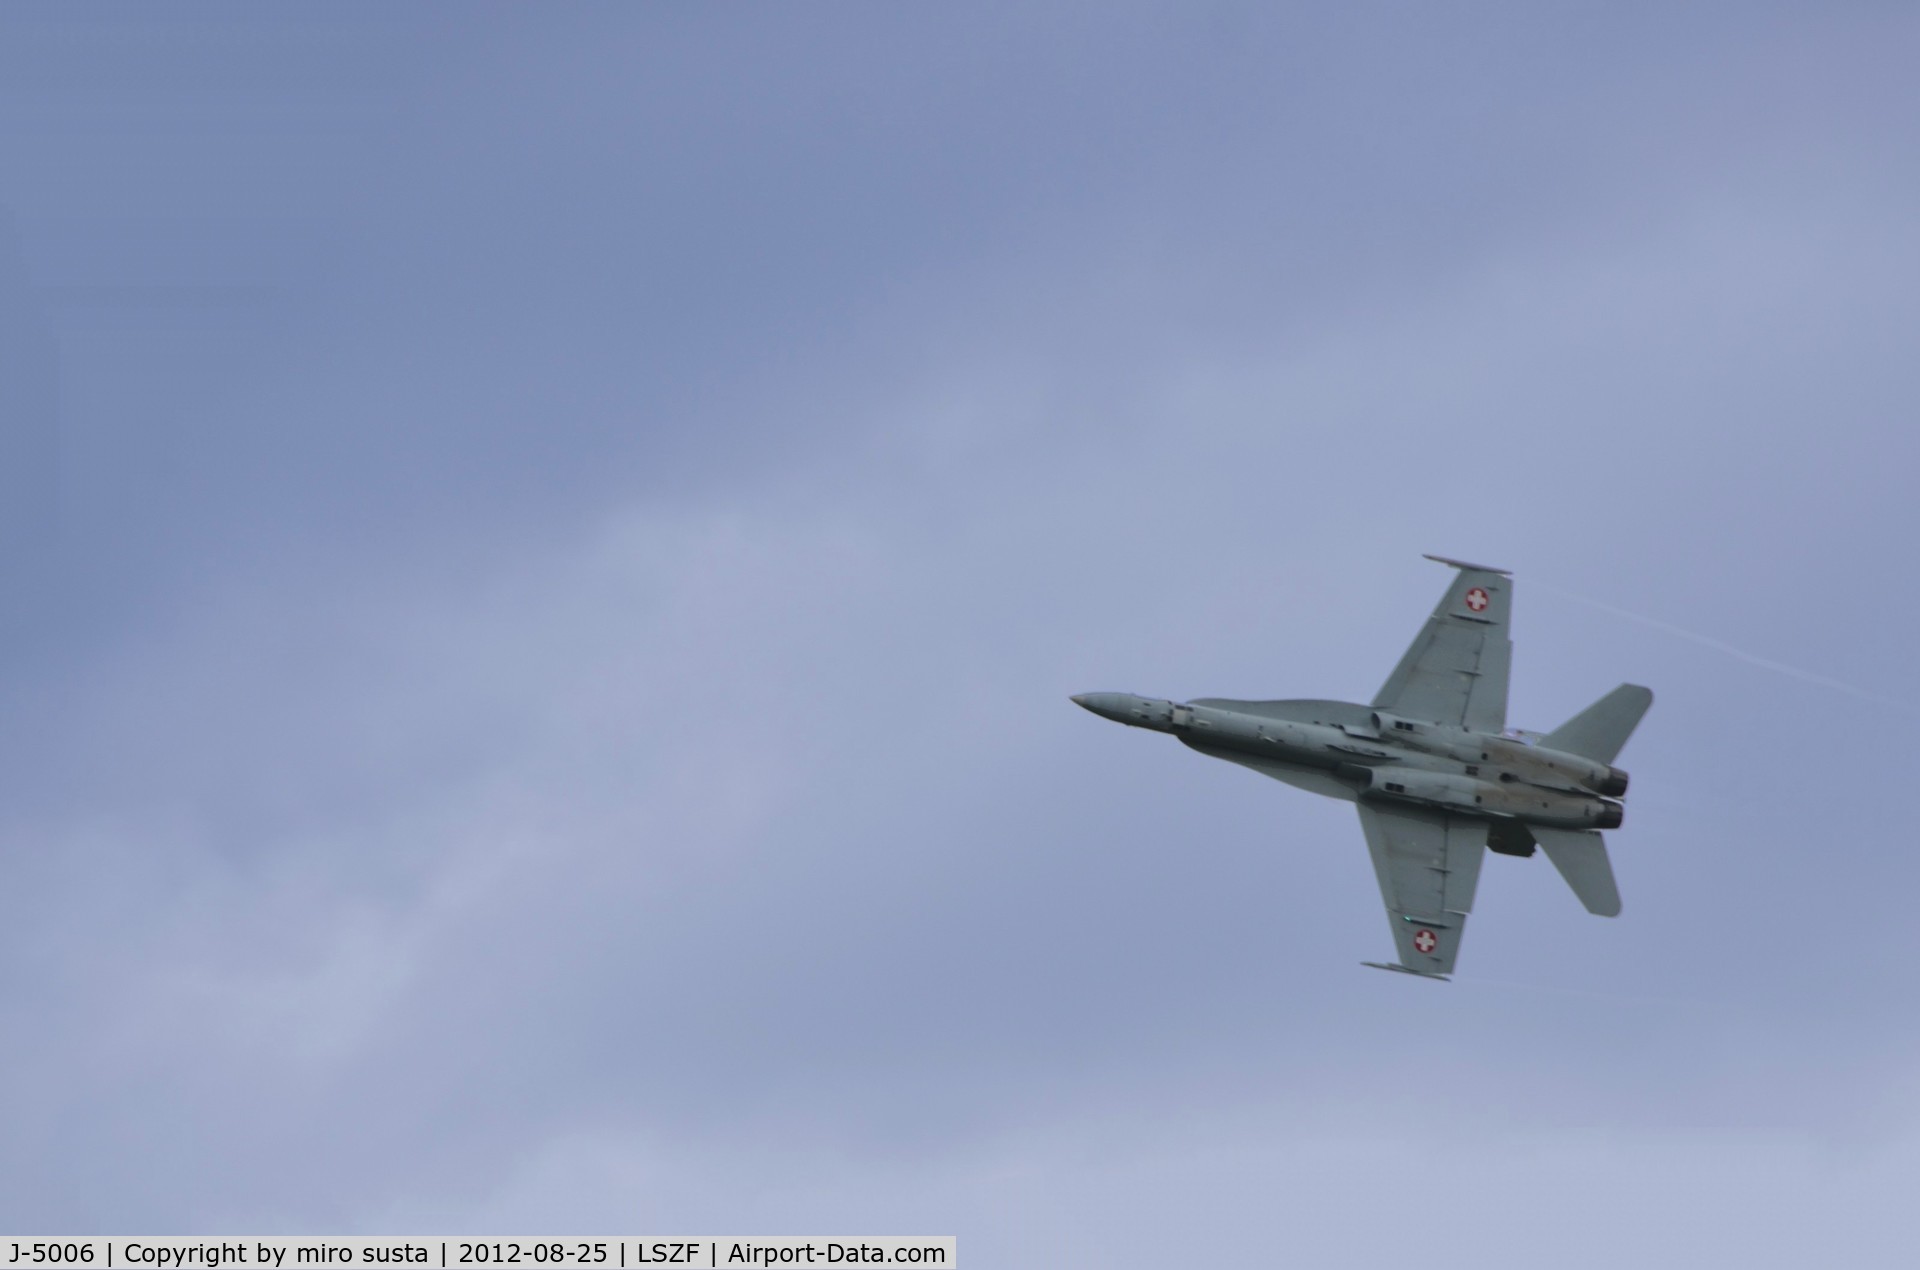 J-5006, McDonnell Douglas F/A-18C Hornet C/N 1329, Swiss Army McDonnell Douglas Hornet Jet over  Birrfeld Airfield in Switzerland during airs-how.